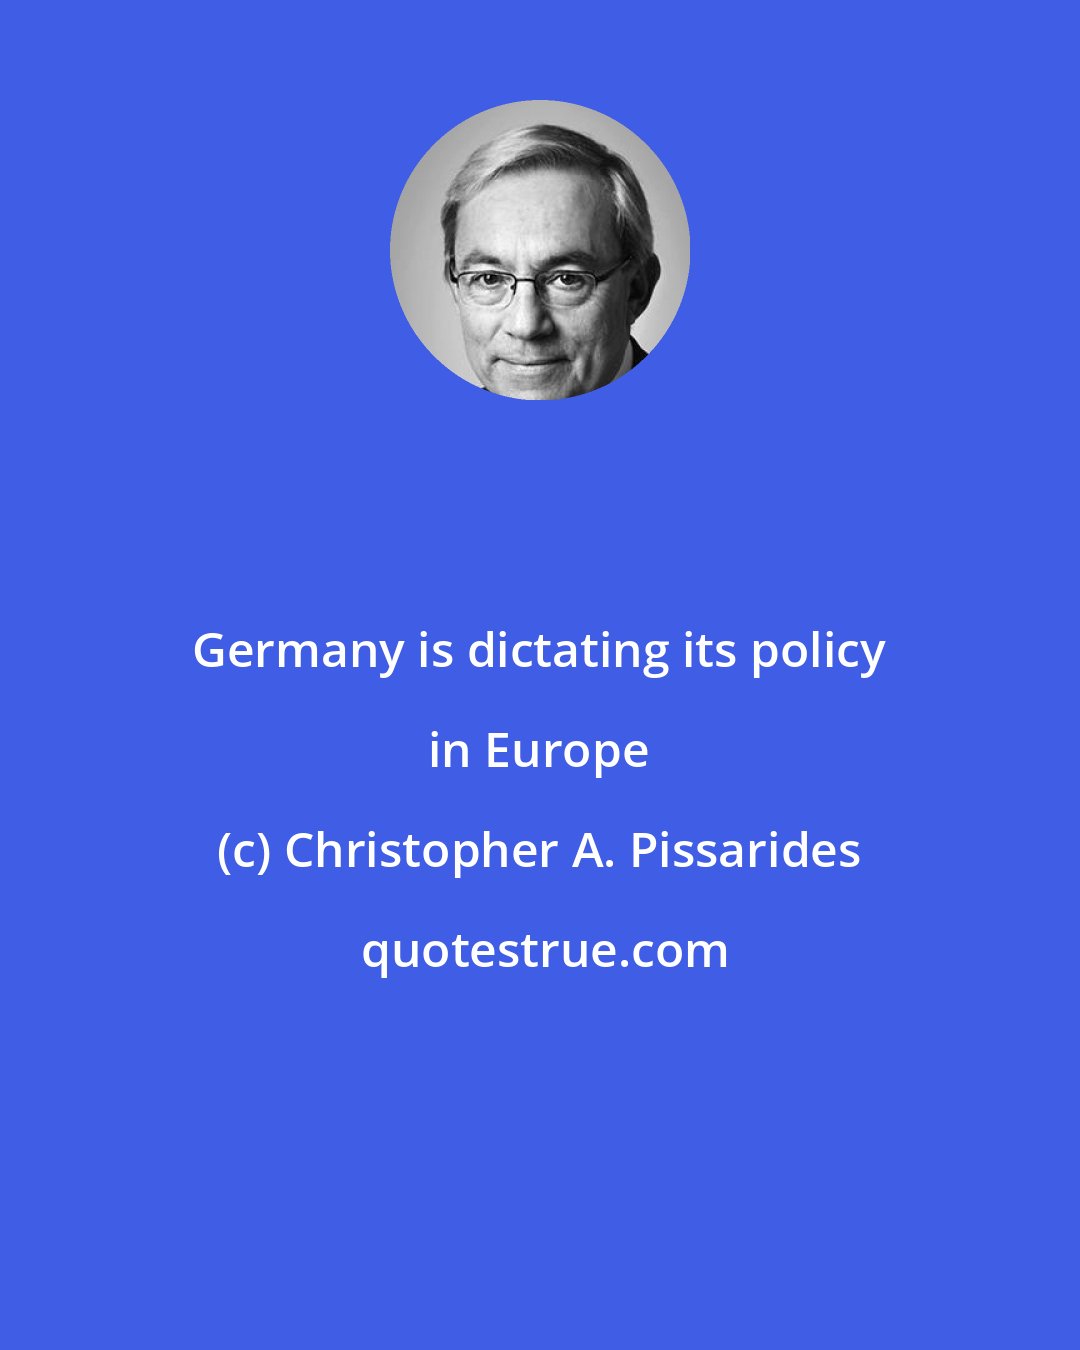 Christopher A. Pissarides: Germany is dictating its policy in Europe